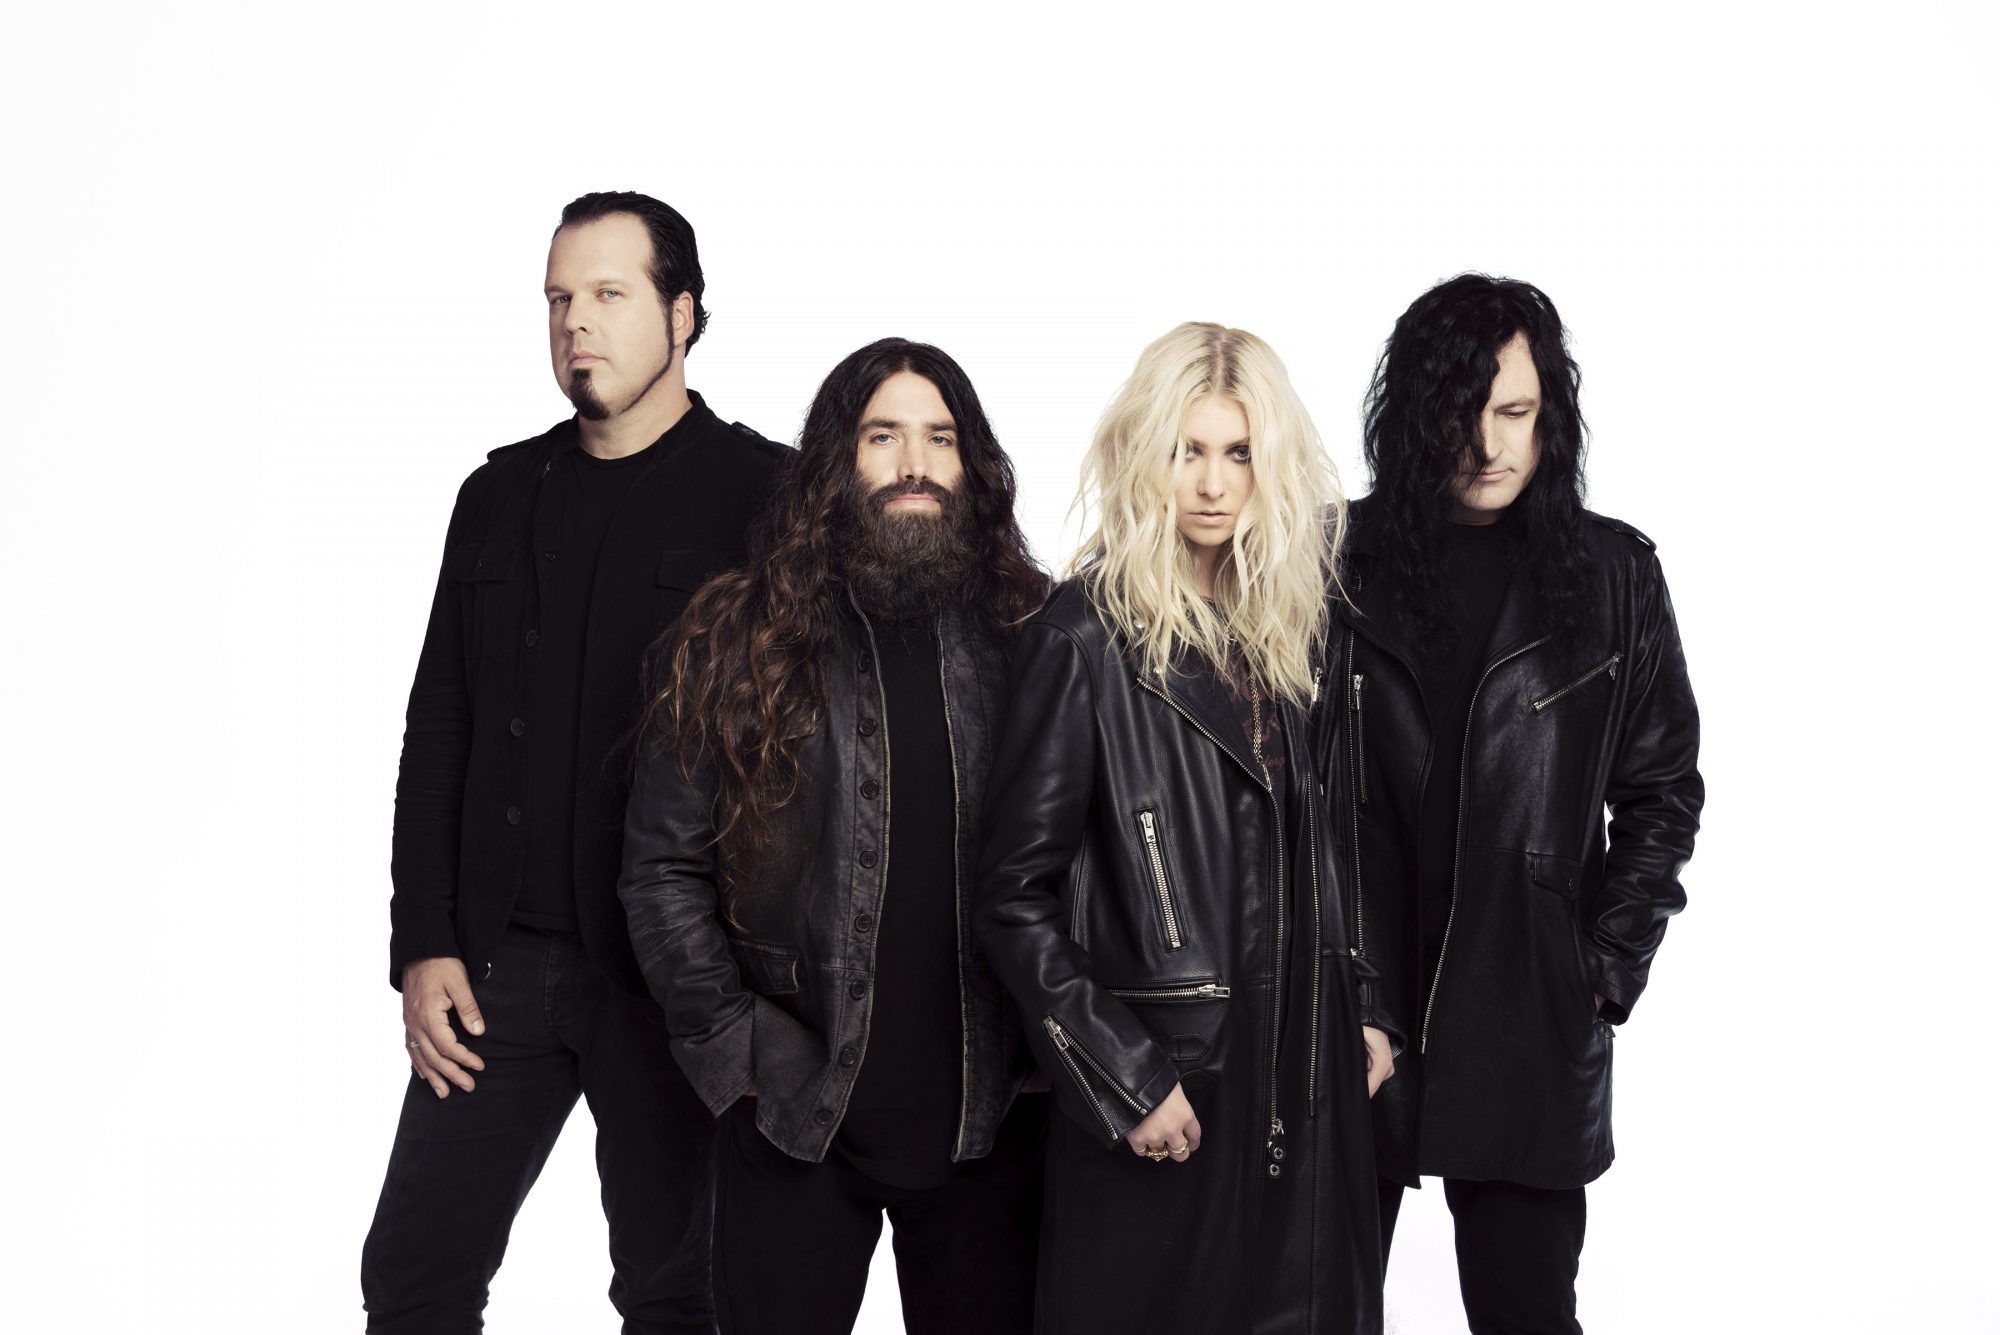 THE PRETTY RECKLESS DROP “DEATH BY ROCK AND ROLL” LYRIC VIDEO